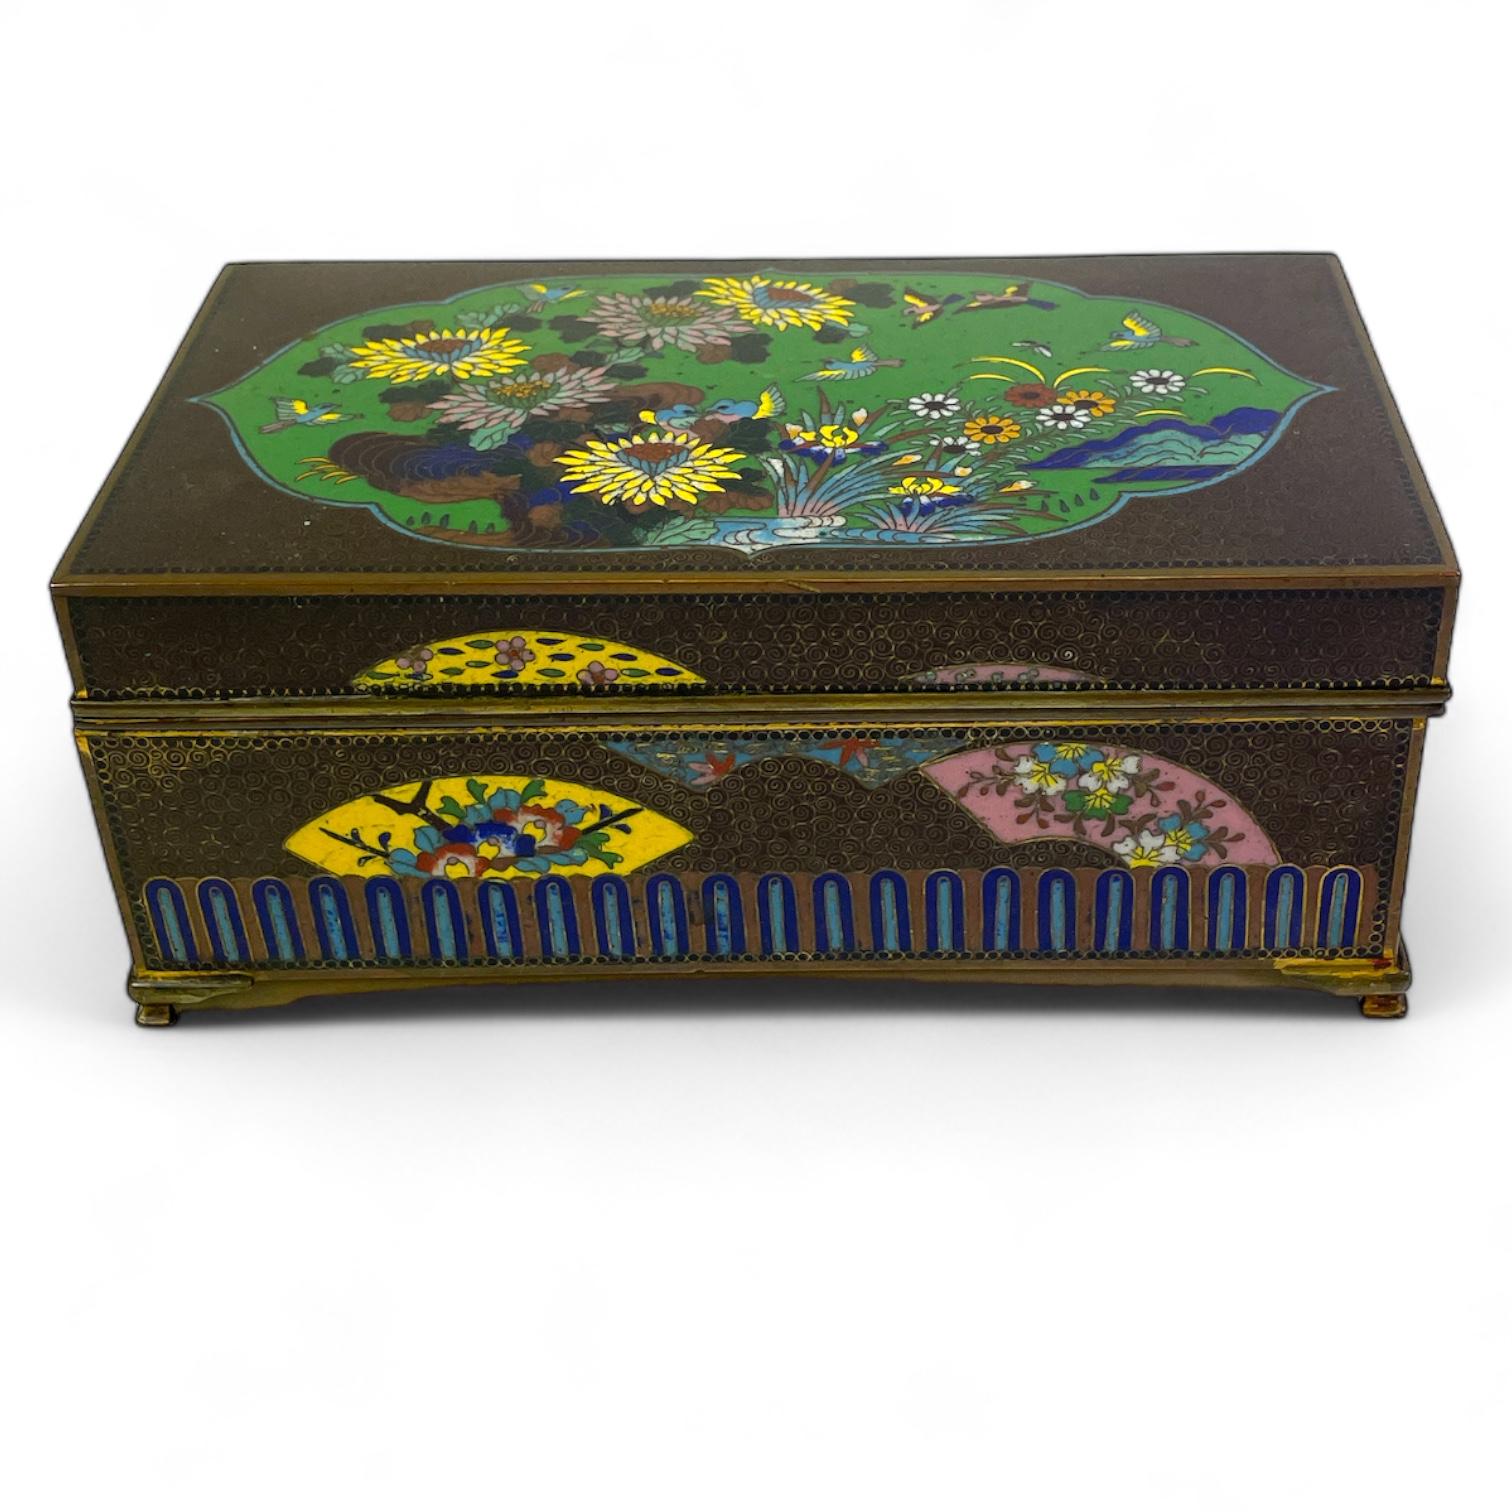 A Japanese Cloisonné enamel decorated desk box 17cm x 9cm x 7cm tall. Inner section is loose but